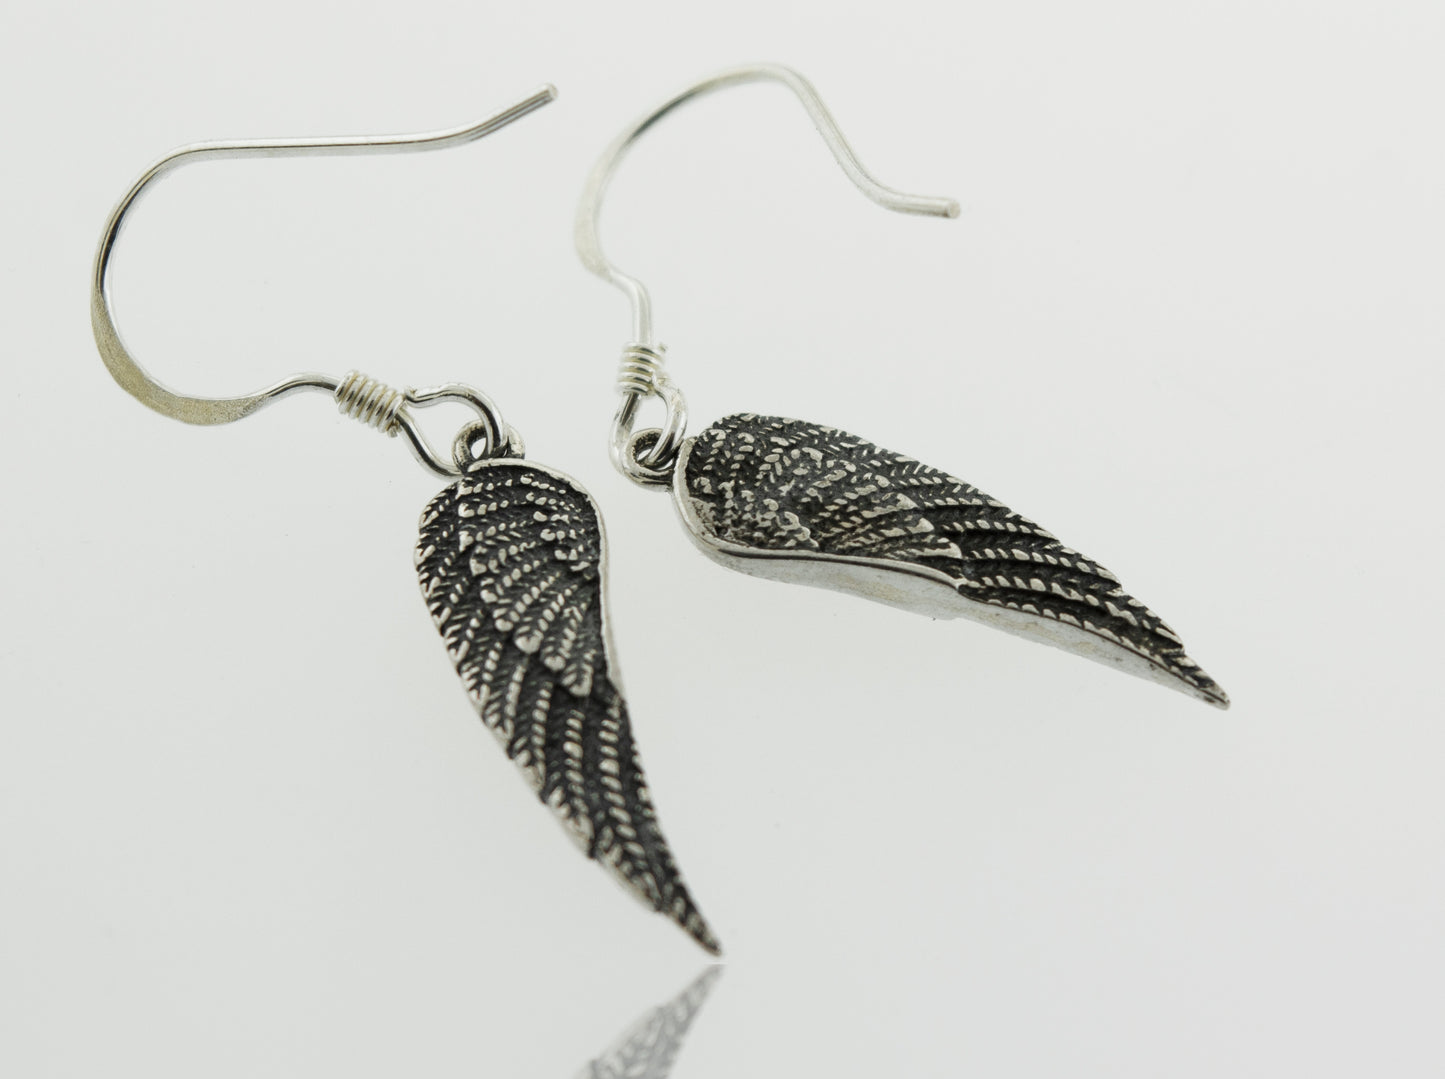 
                  
                    A pair of Super Silver Dainty Wing Earrings crafted from .925 sterling silver, displayed on a pristine white surface.
                  
                